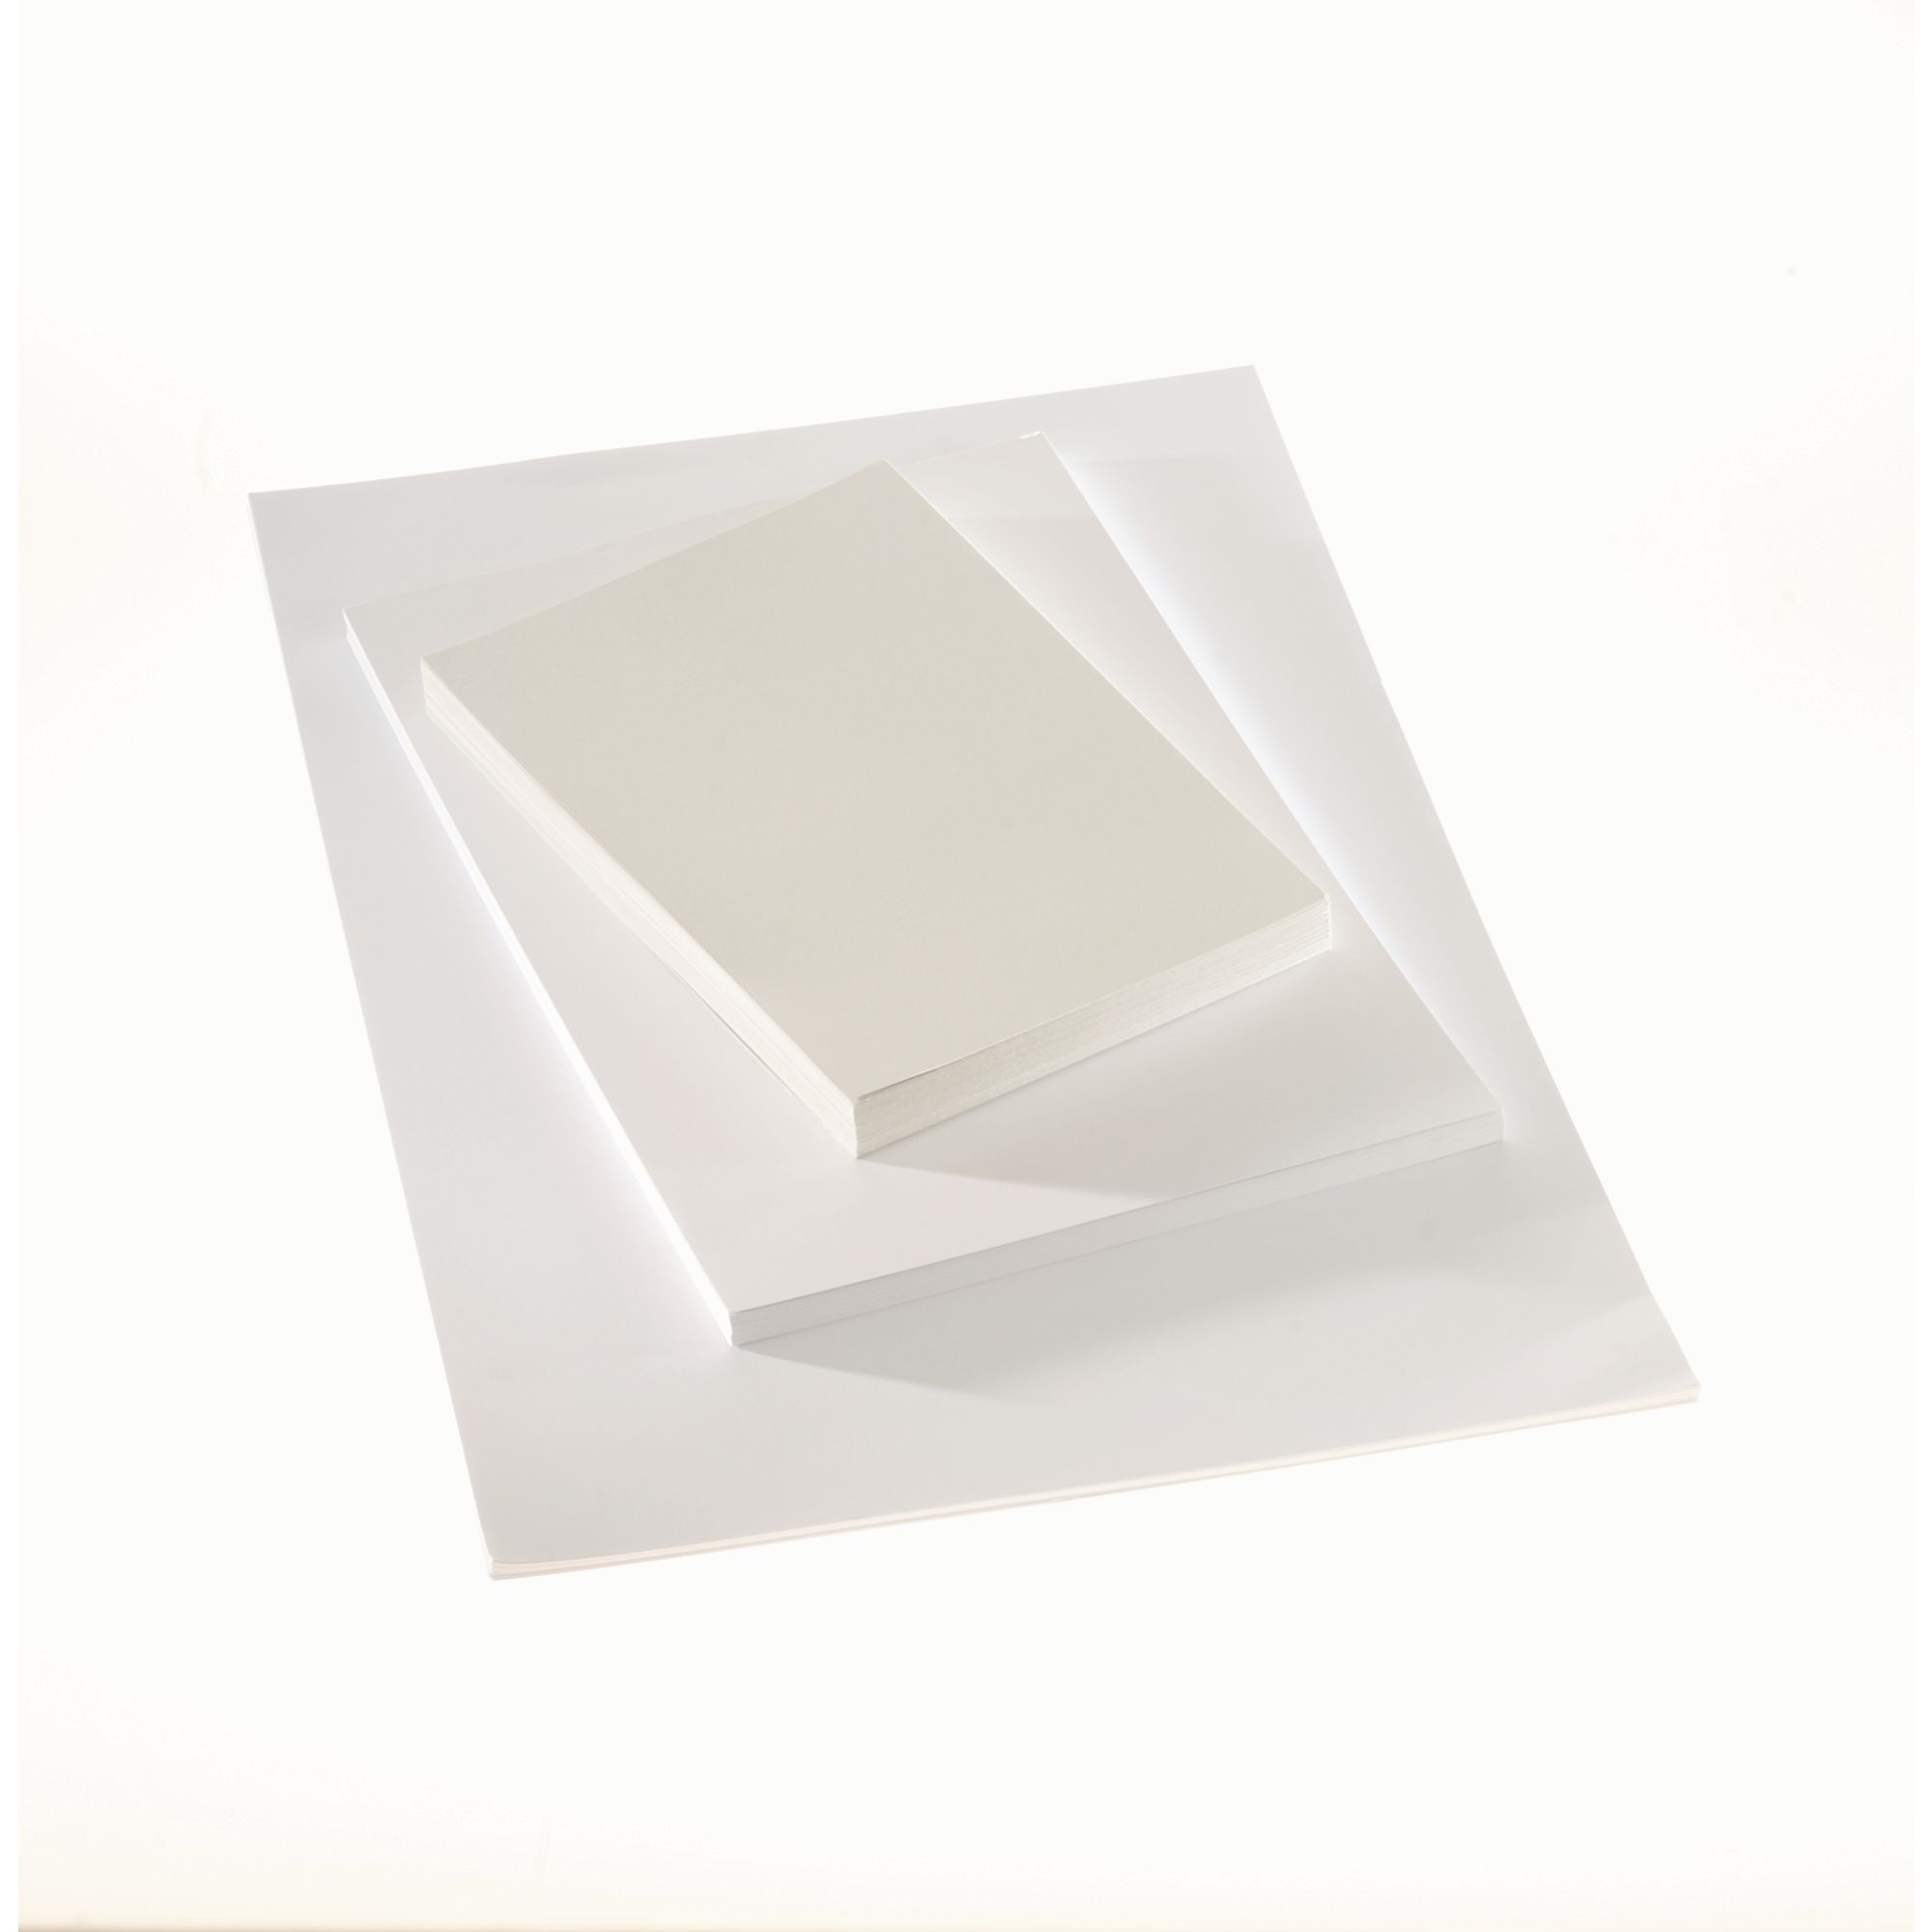 White A3 Card 280 Micron - Pack of 50